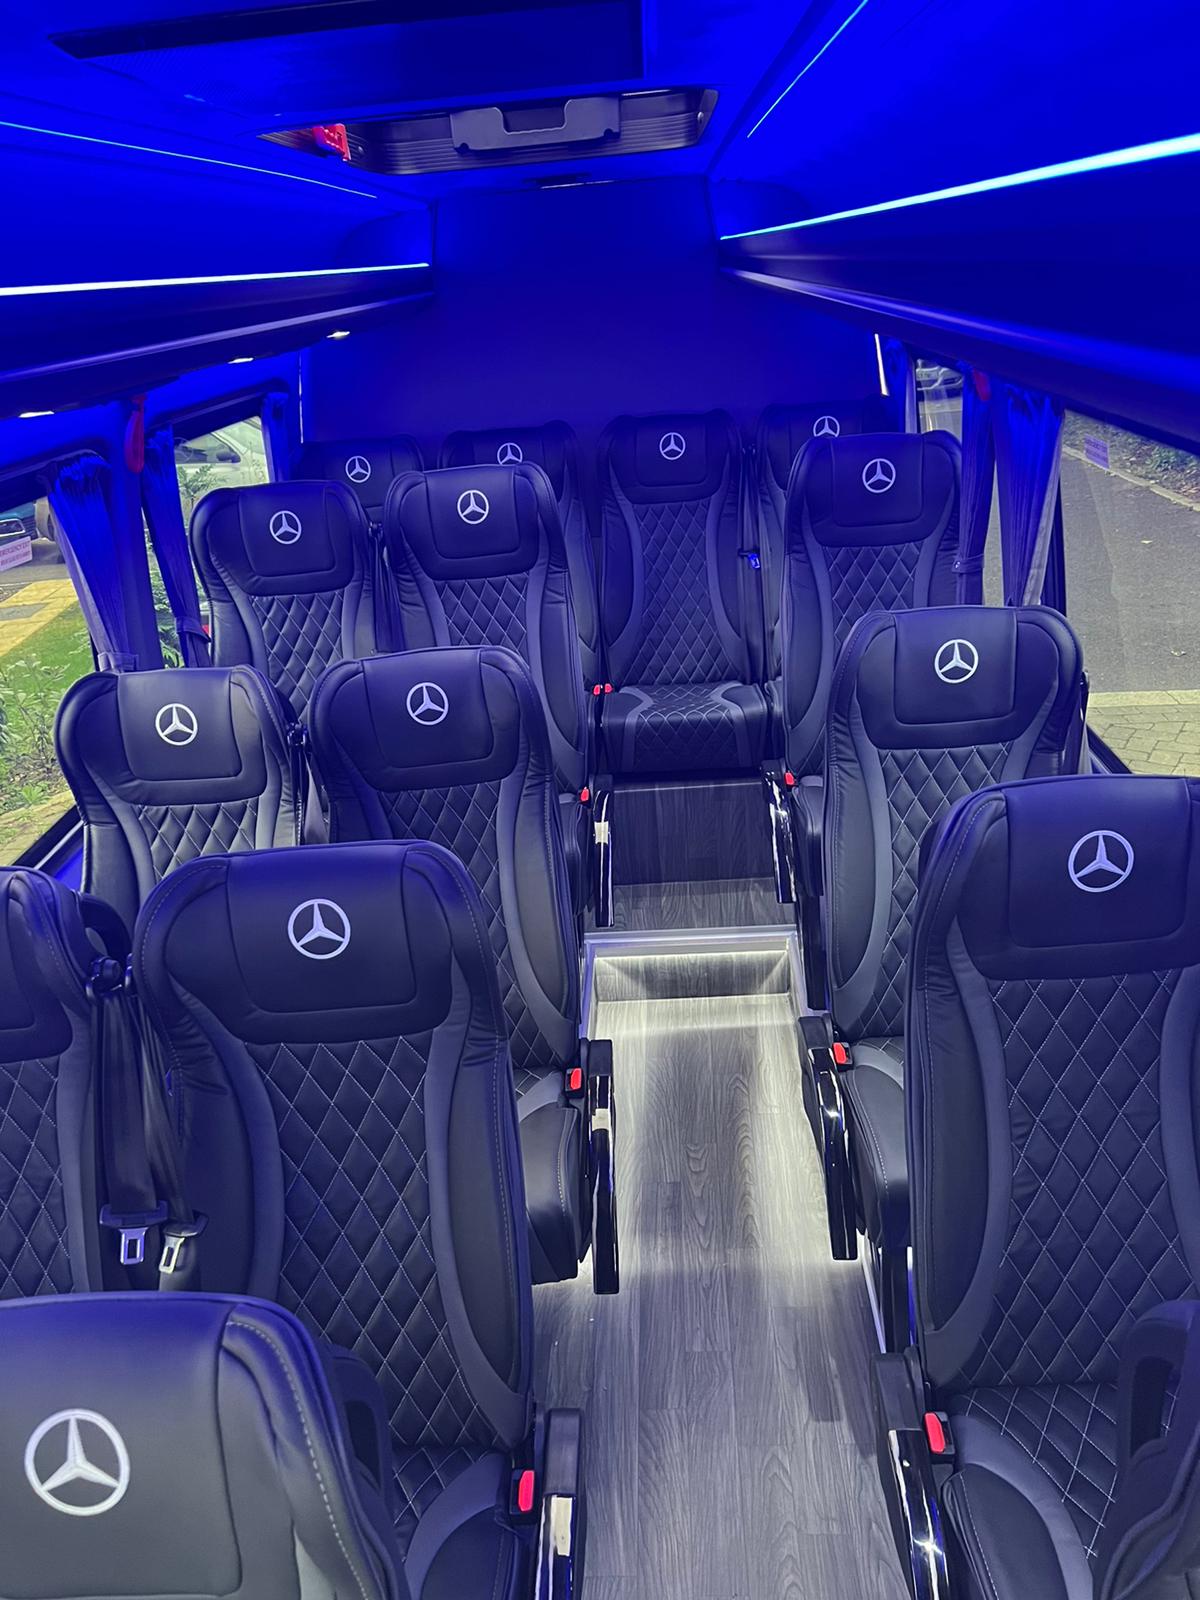 How to Find Affordable 16 Seater Minibus Hire Near You